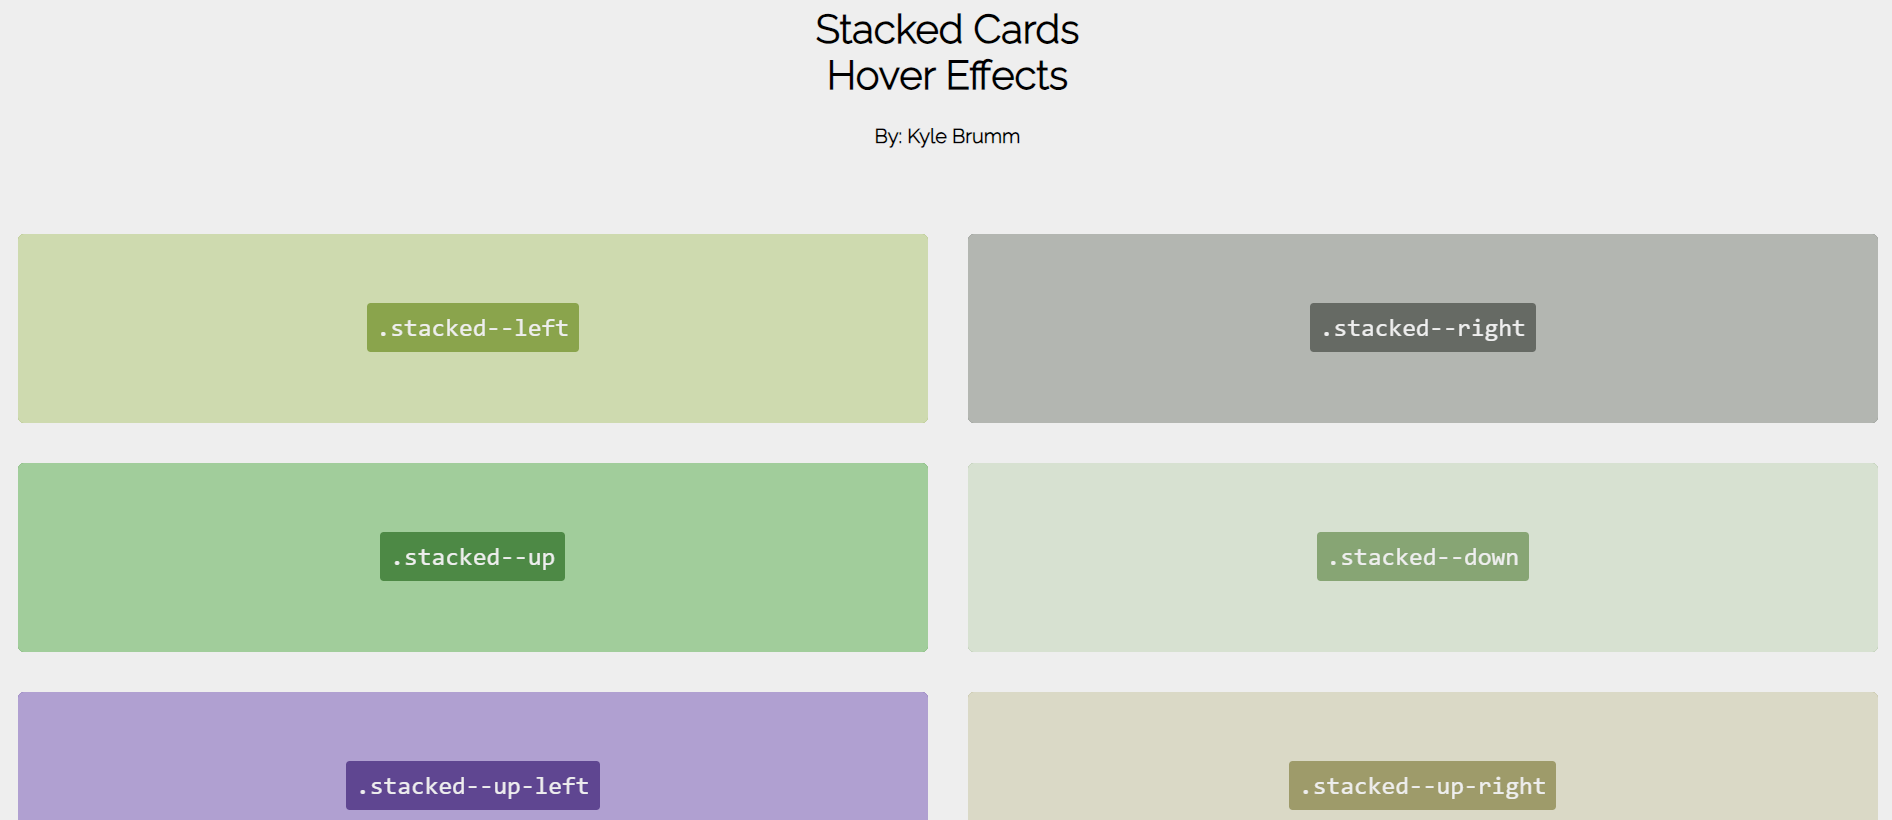 Stacked Cards Hover Effects